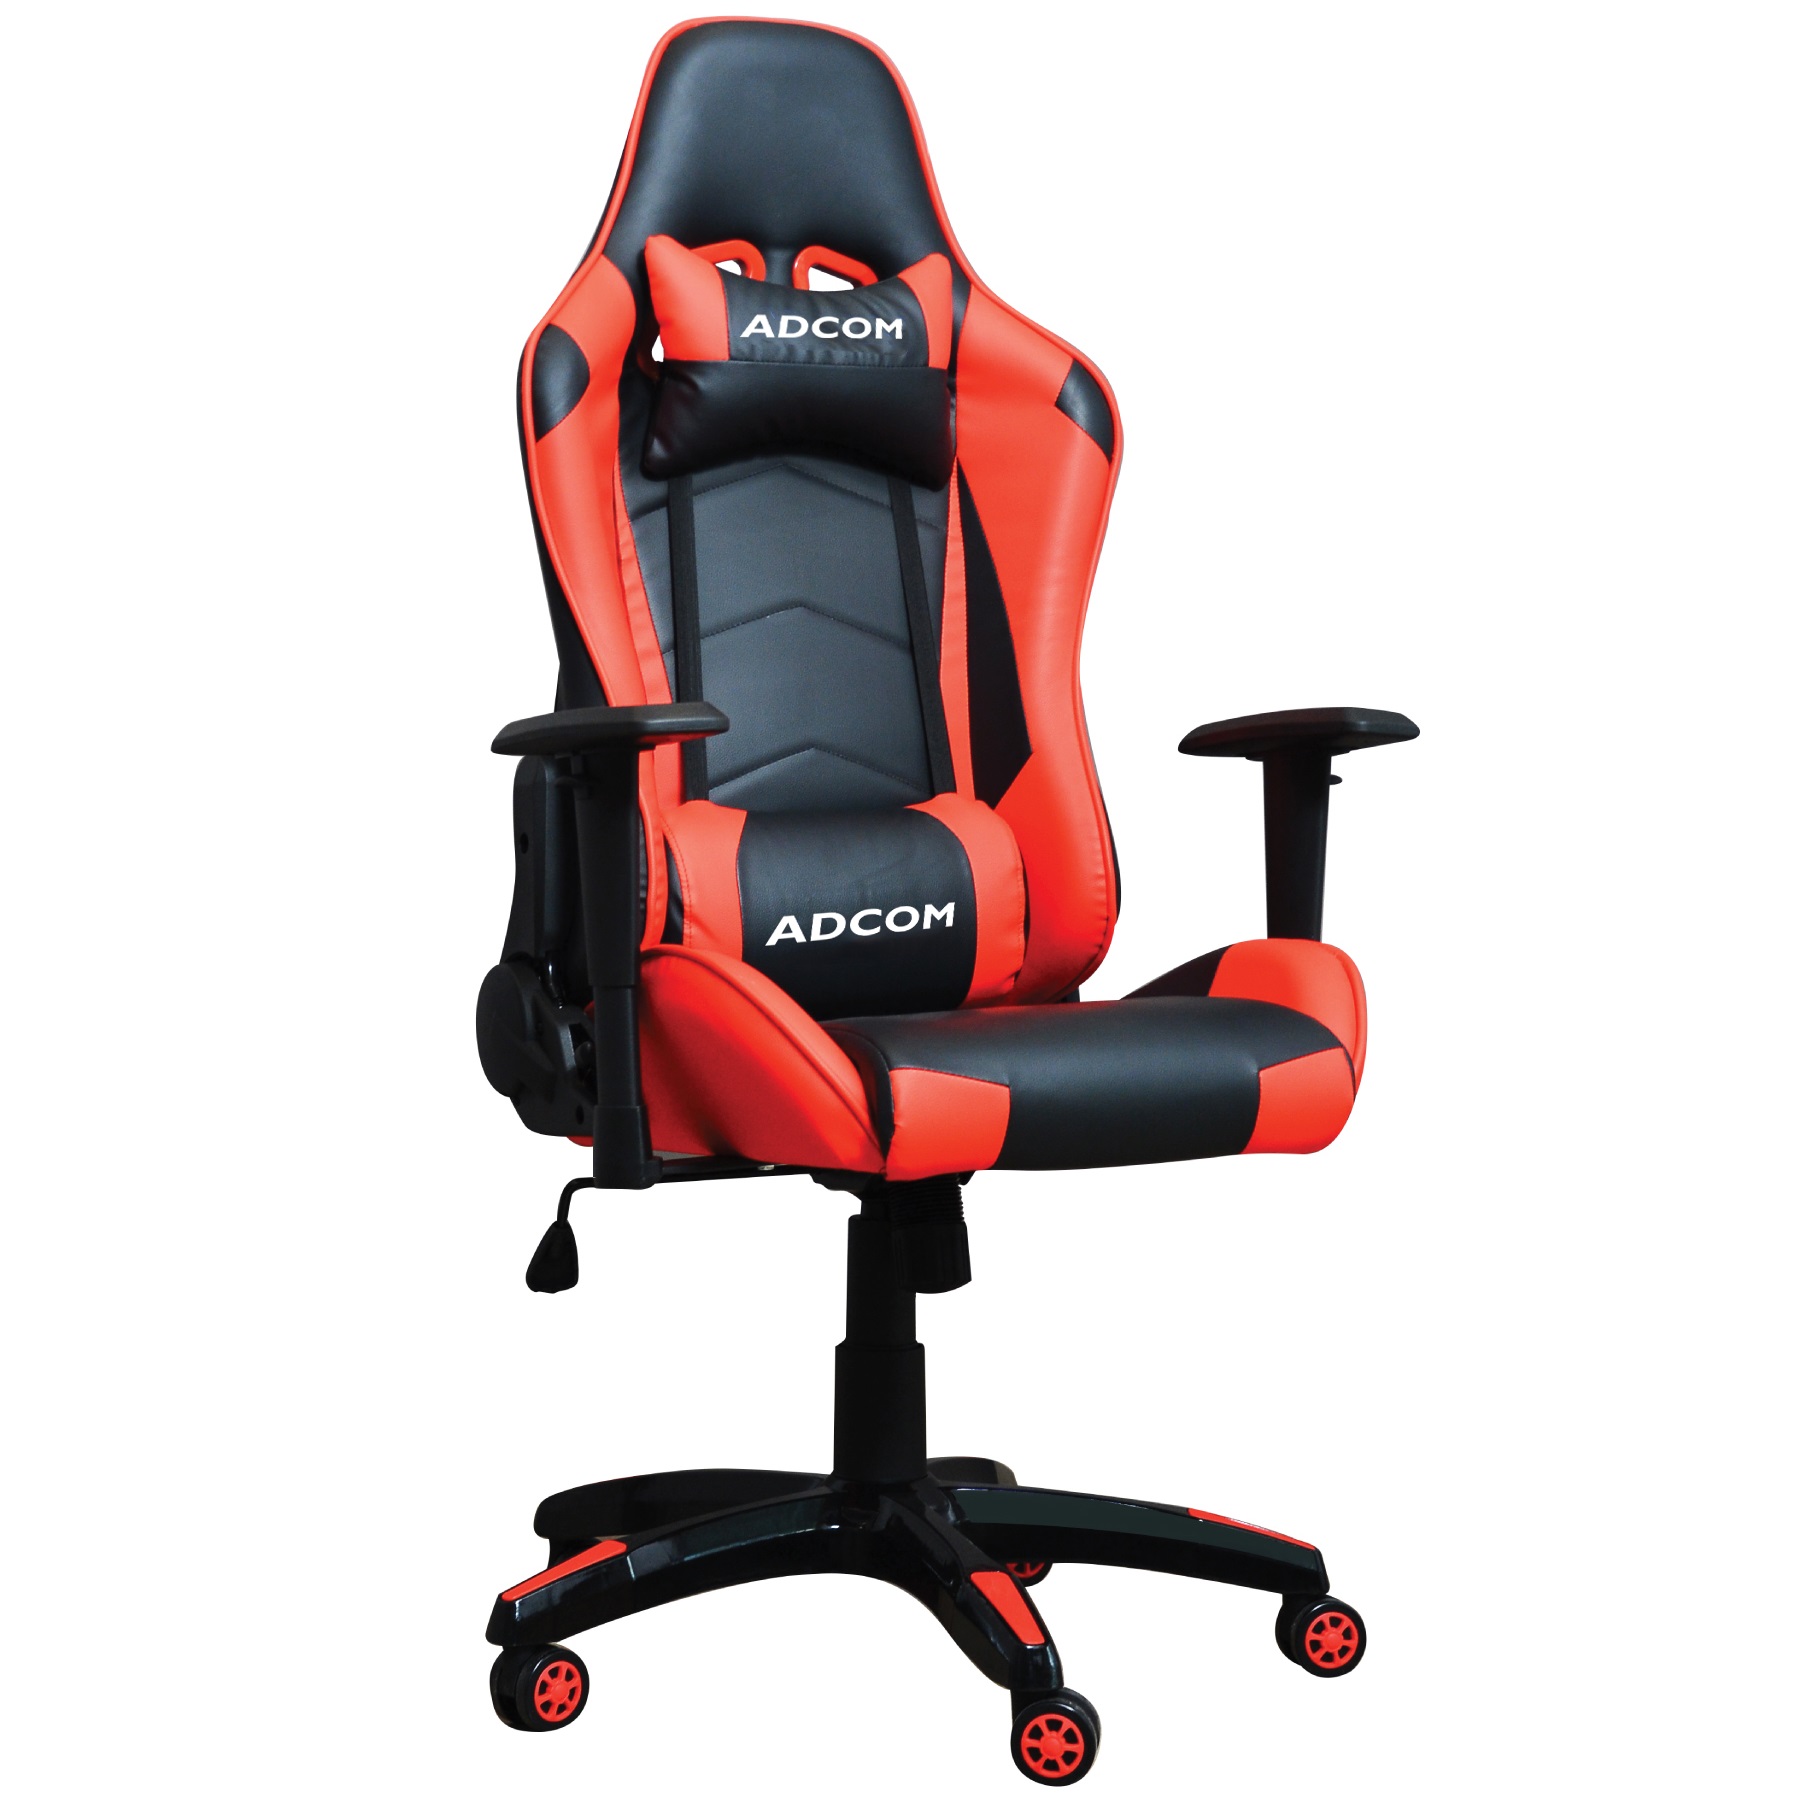 Buy Gaming Chair In India at Affordable Price